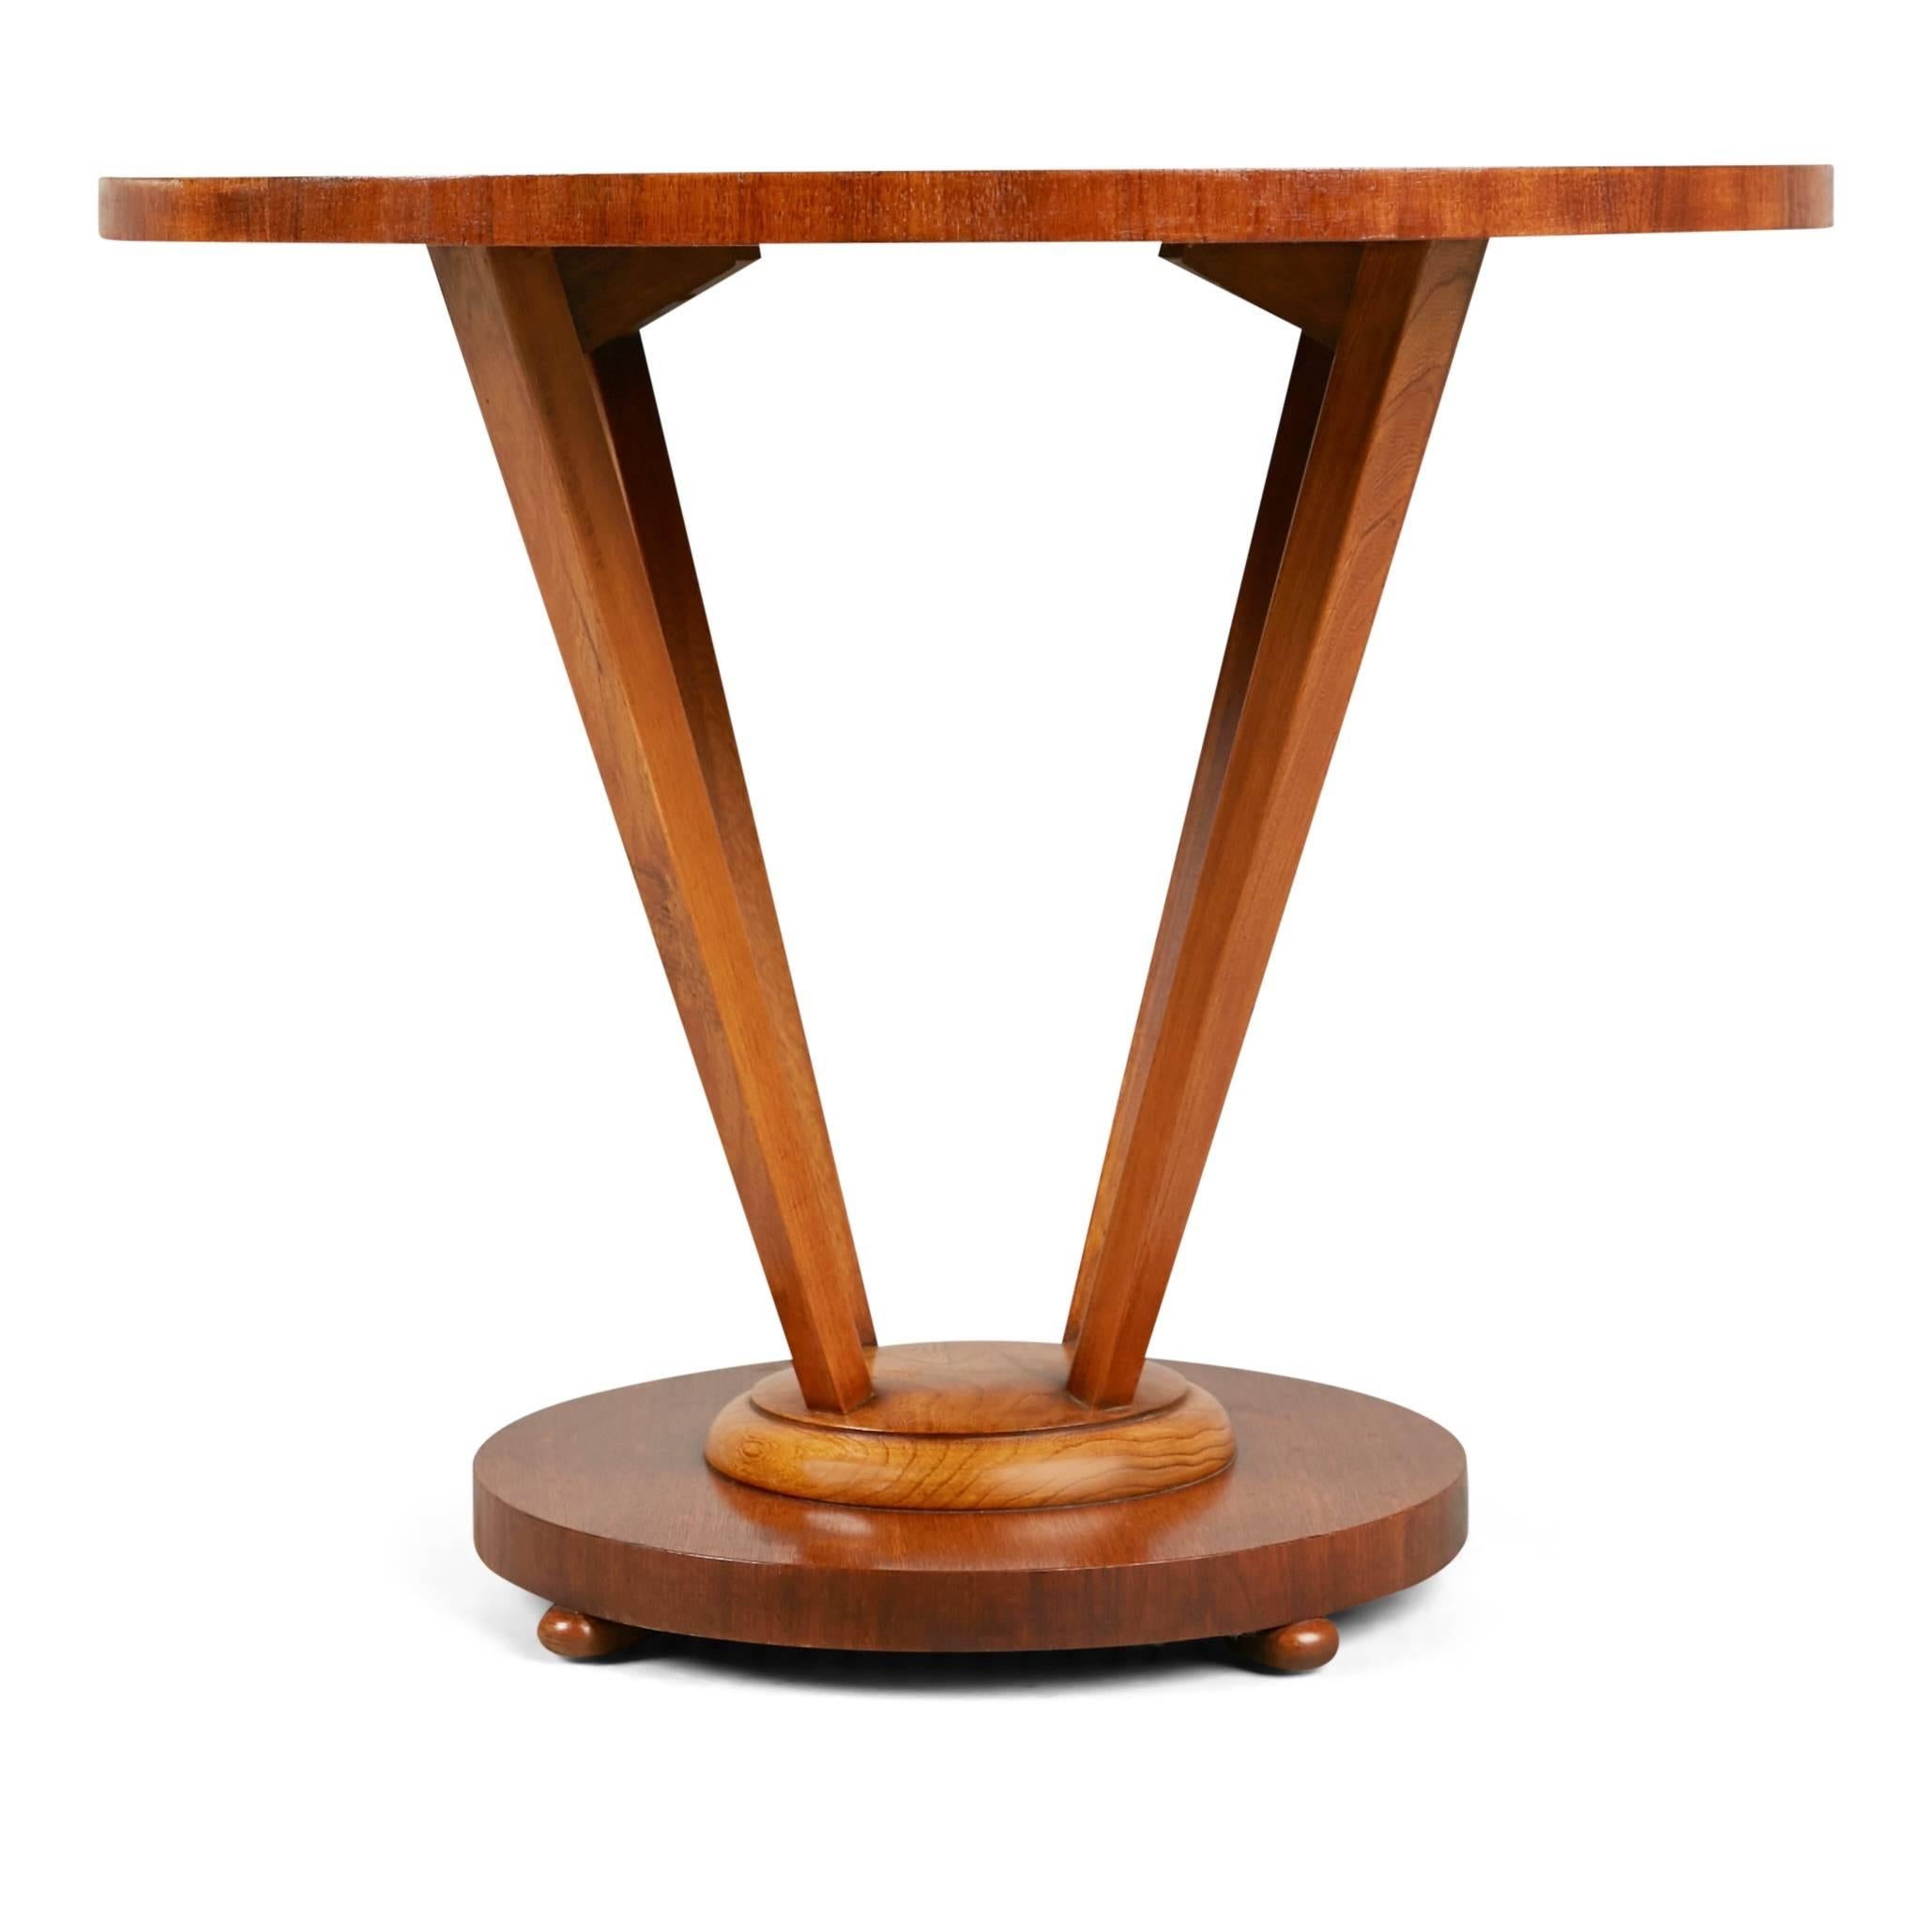 Occasional table by Lane, circa 1960. Fabricated from walnut and in the center of the surface there is a square segment of small tiles made up of shades of white with undertones of a soft subtle green. The circular top is connected to a plinth base